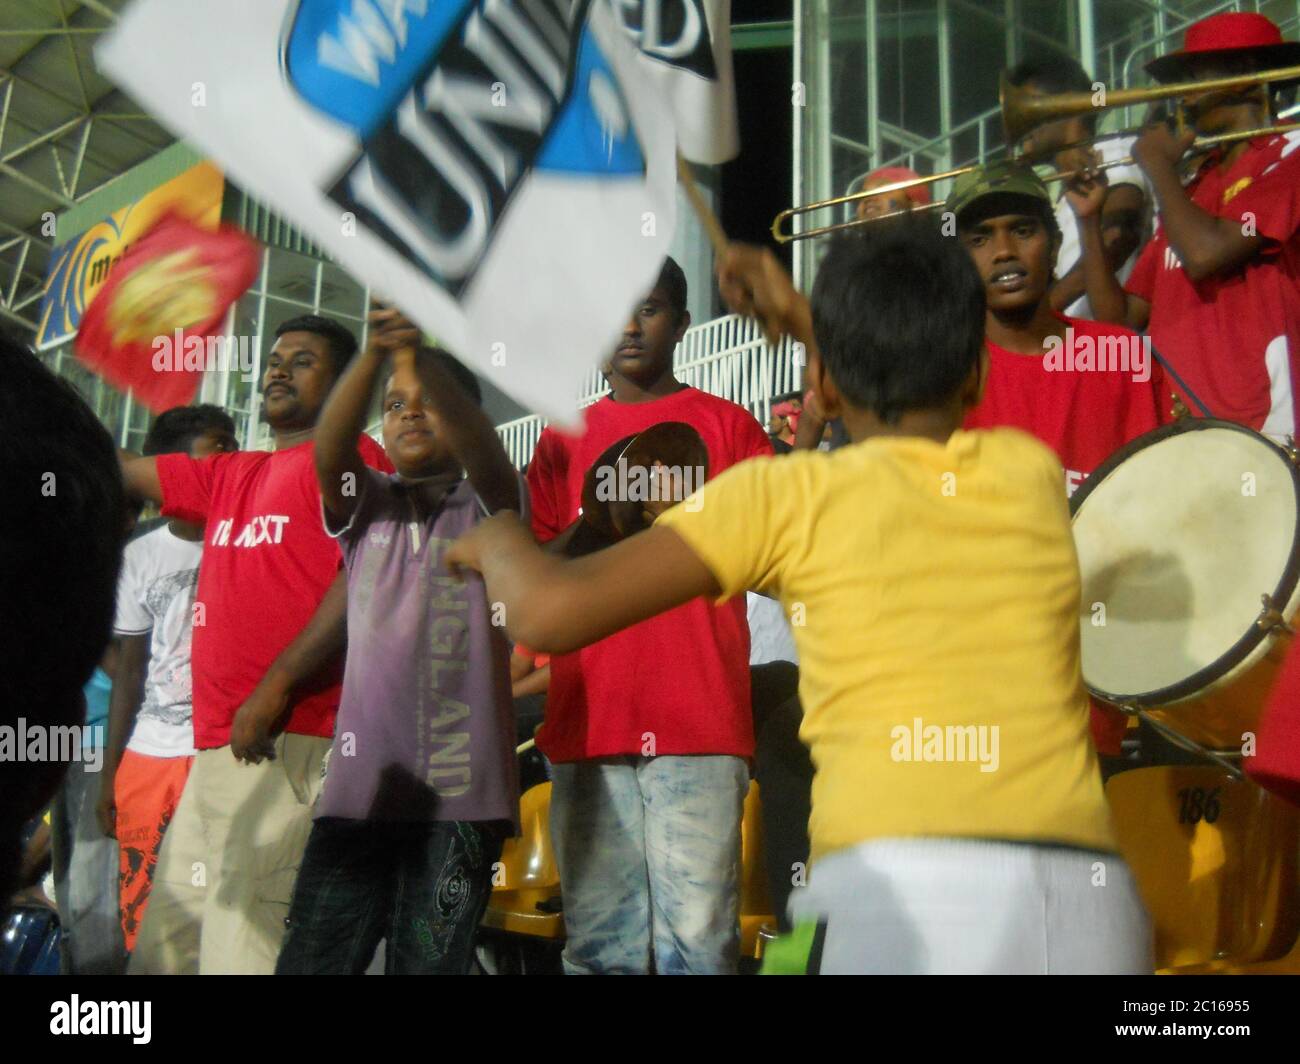 Fans enjoying and supporting their team UVA Next, during the 1st Sri Lanka Premier League (SLPL) in 2012. UVA Next were the champions of the League. R Stock Photo